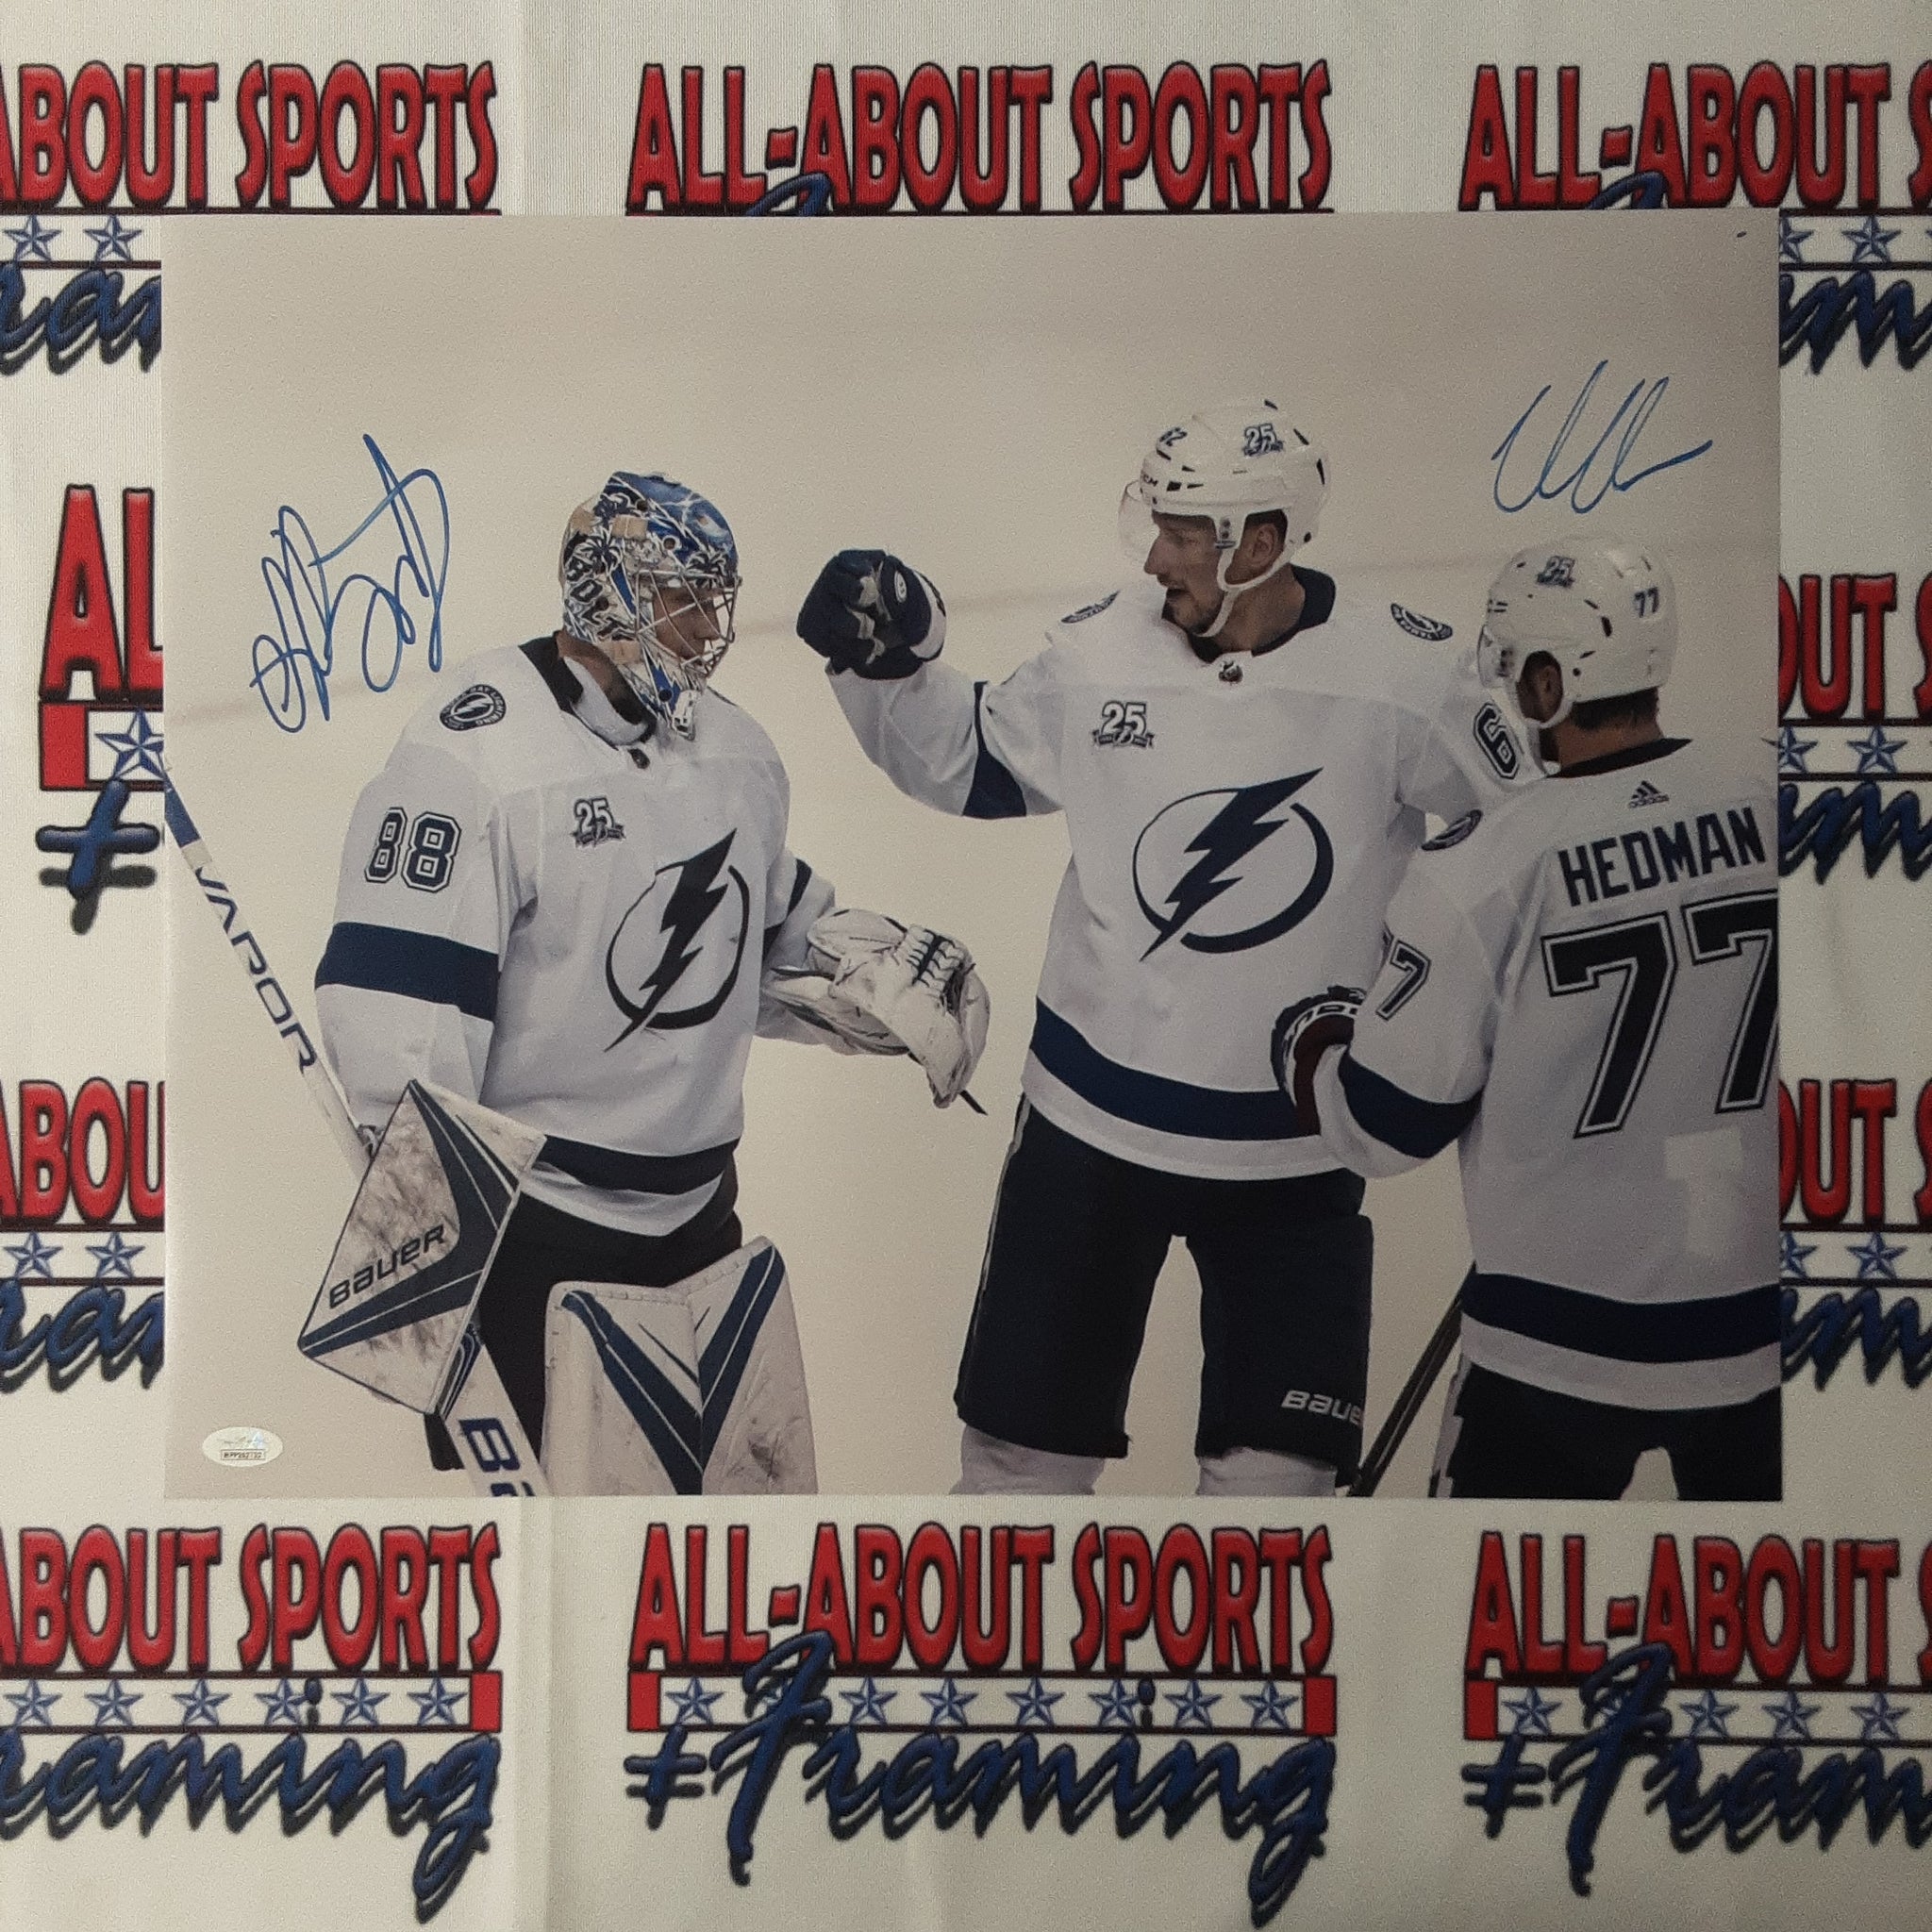 Andrei Vasilevsky and Victor Hedman Authentic Signed 16x20 Photo Autographed JSA